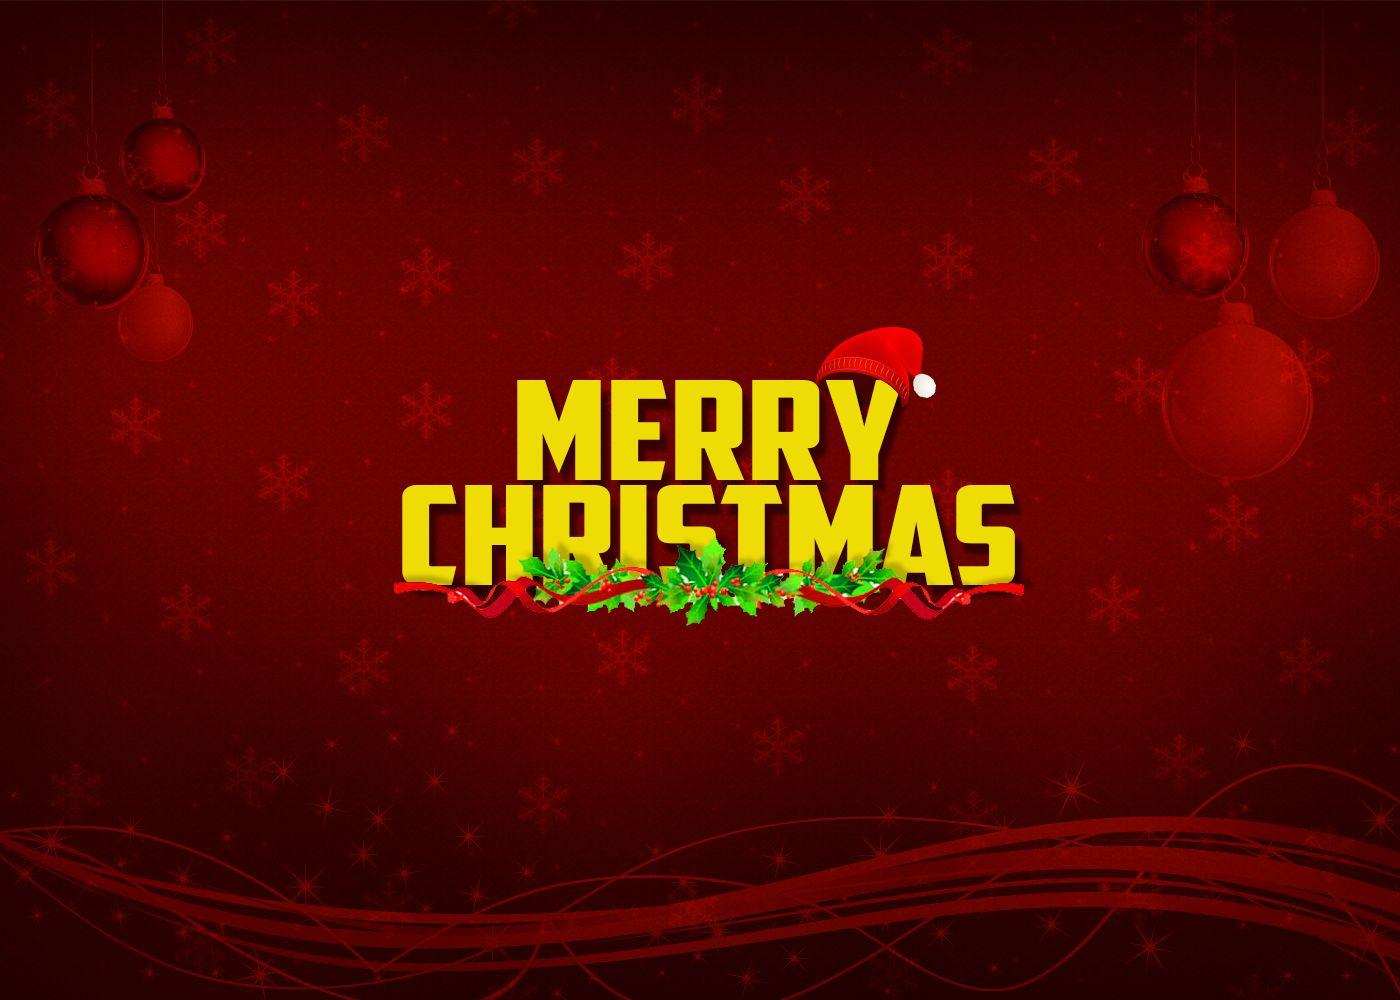 Free Merry Christmas Wallpapers and Desktop Backgrounds